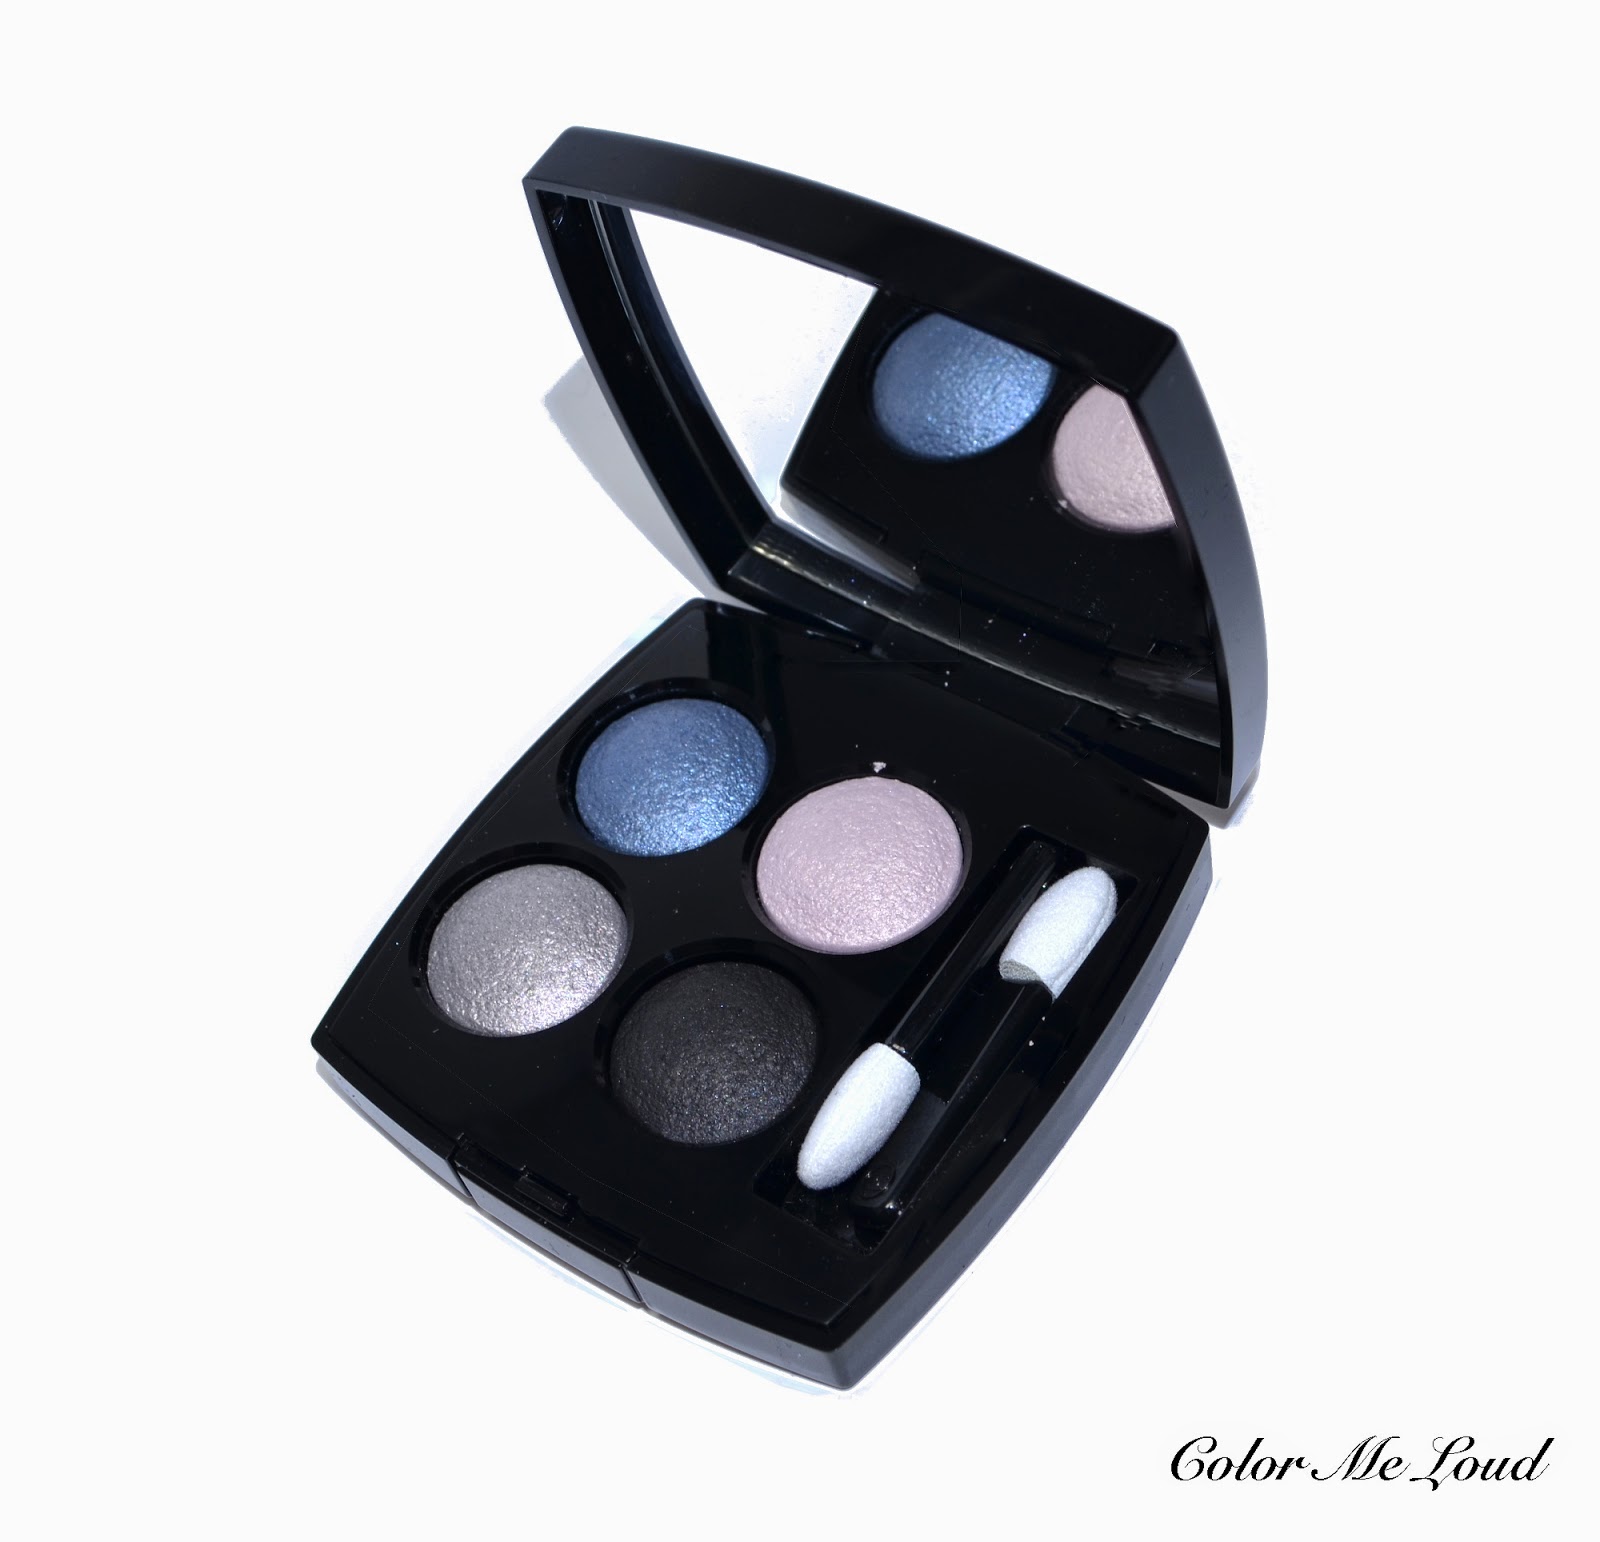 Chanel Tweed Brun et Rose (04) Les 4 Ombres Tweed Multi-Effect Eyeshadow  Quad Review & Swatches